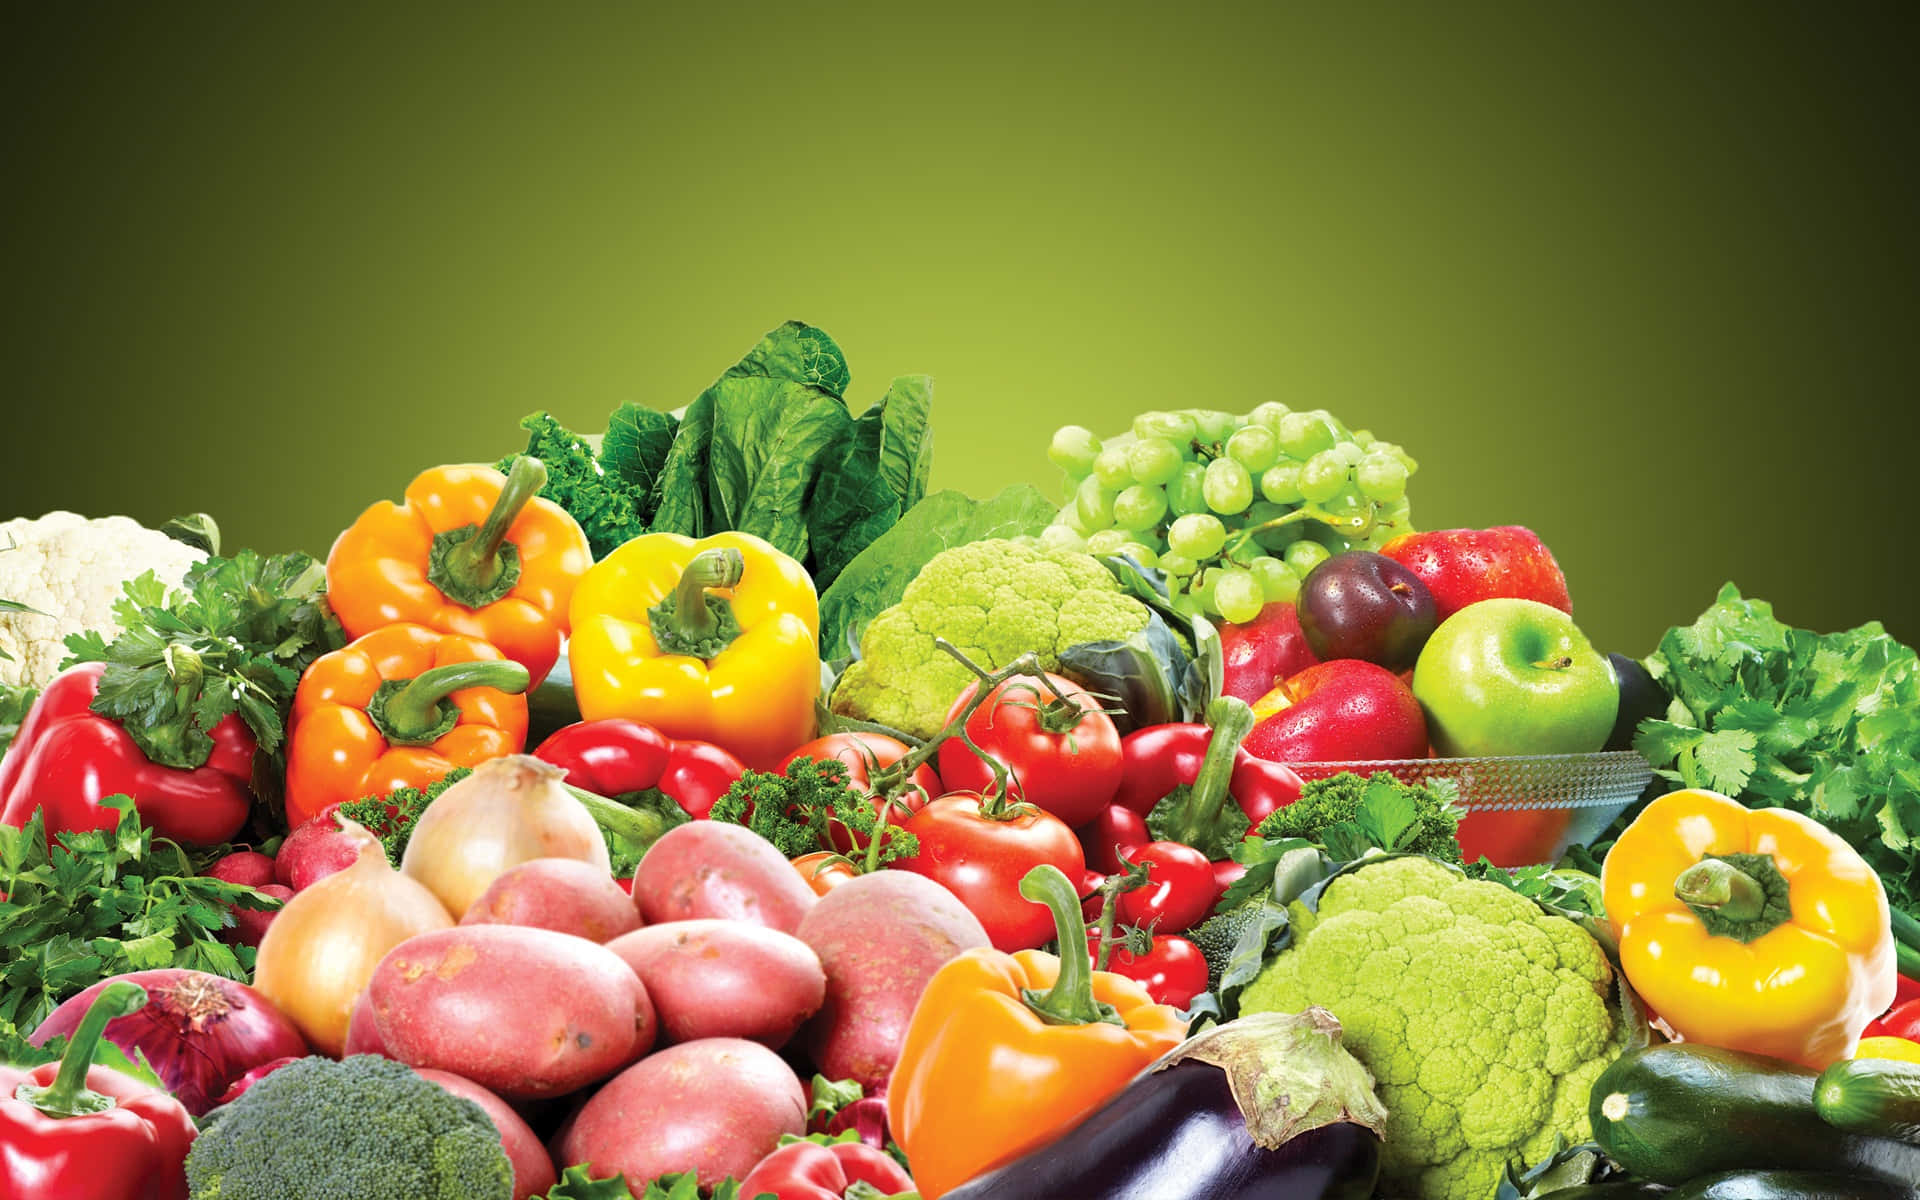 A Rich Assortment of Healthful Fruits and Vegetables